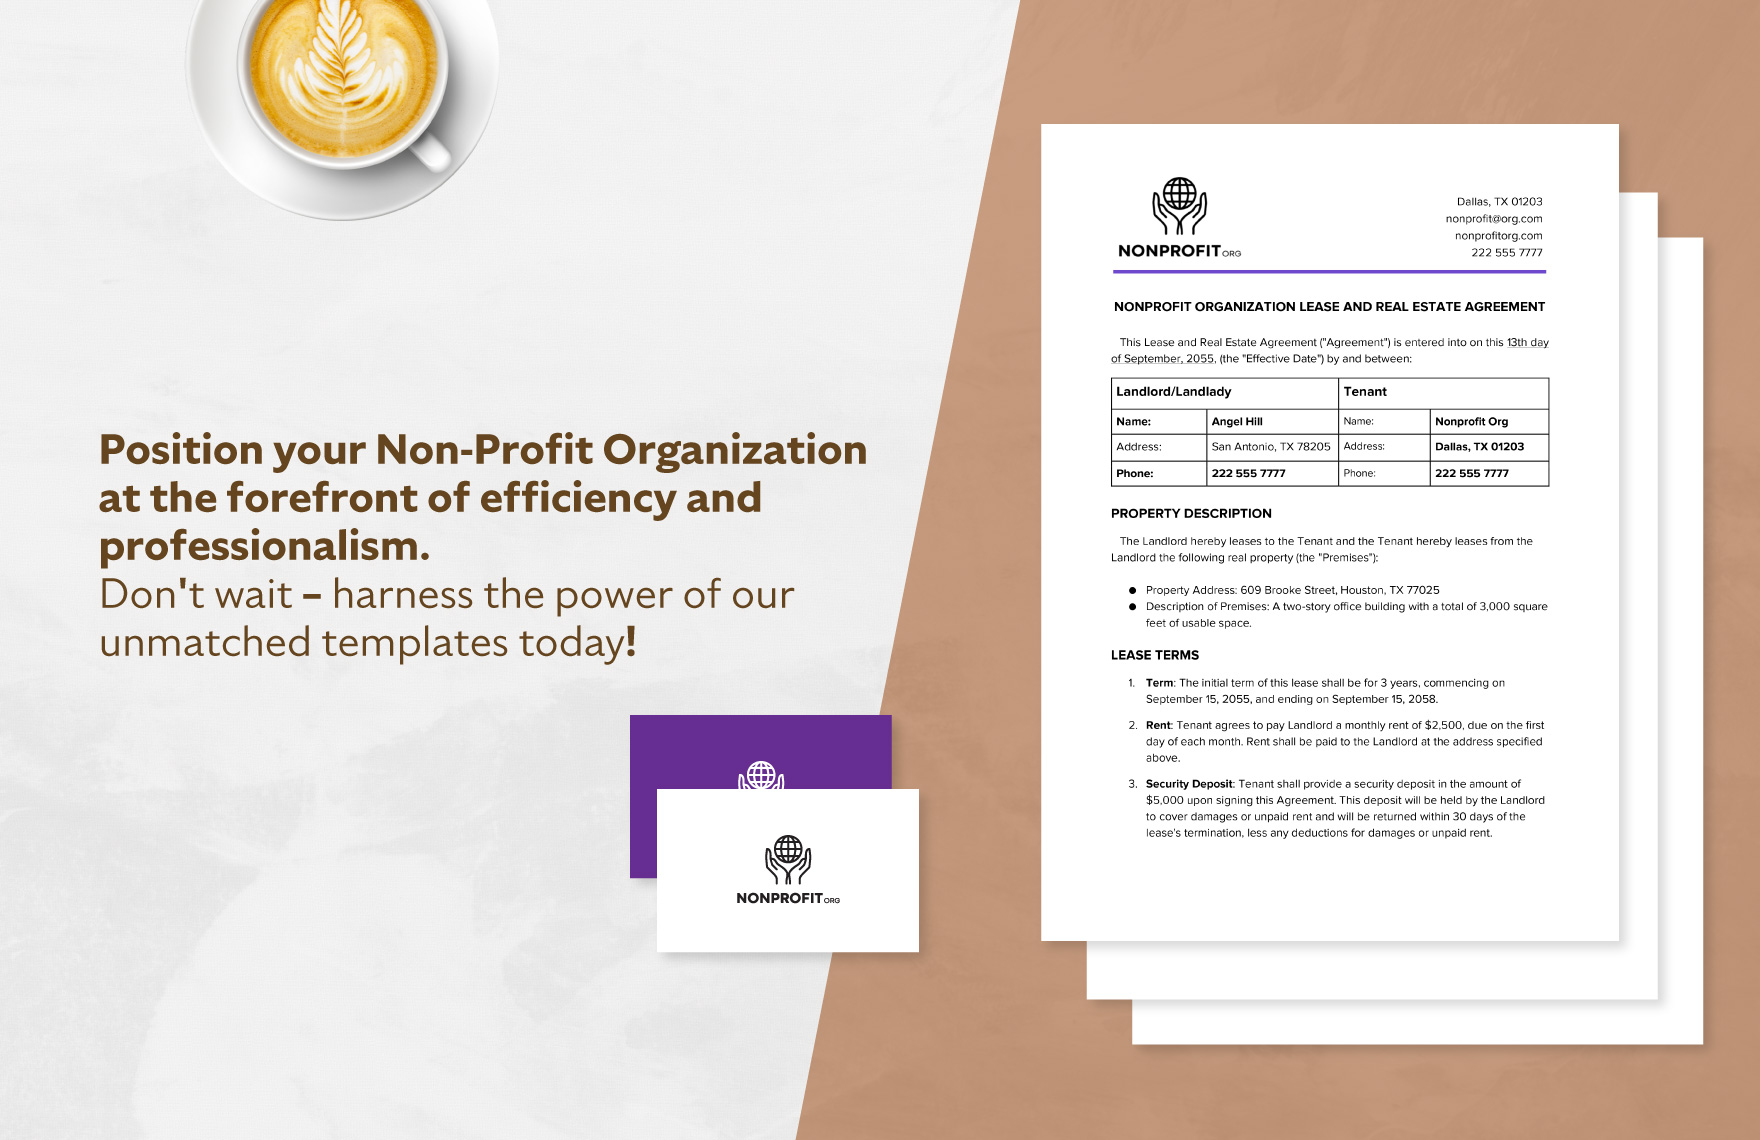 Nonprofit Organization Lease and Real Estate Agreement Template